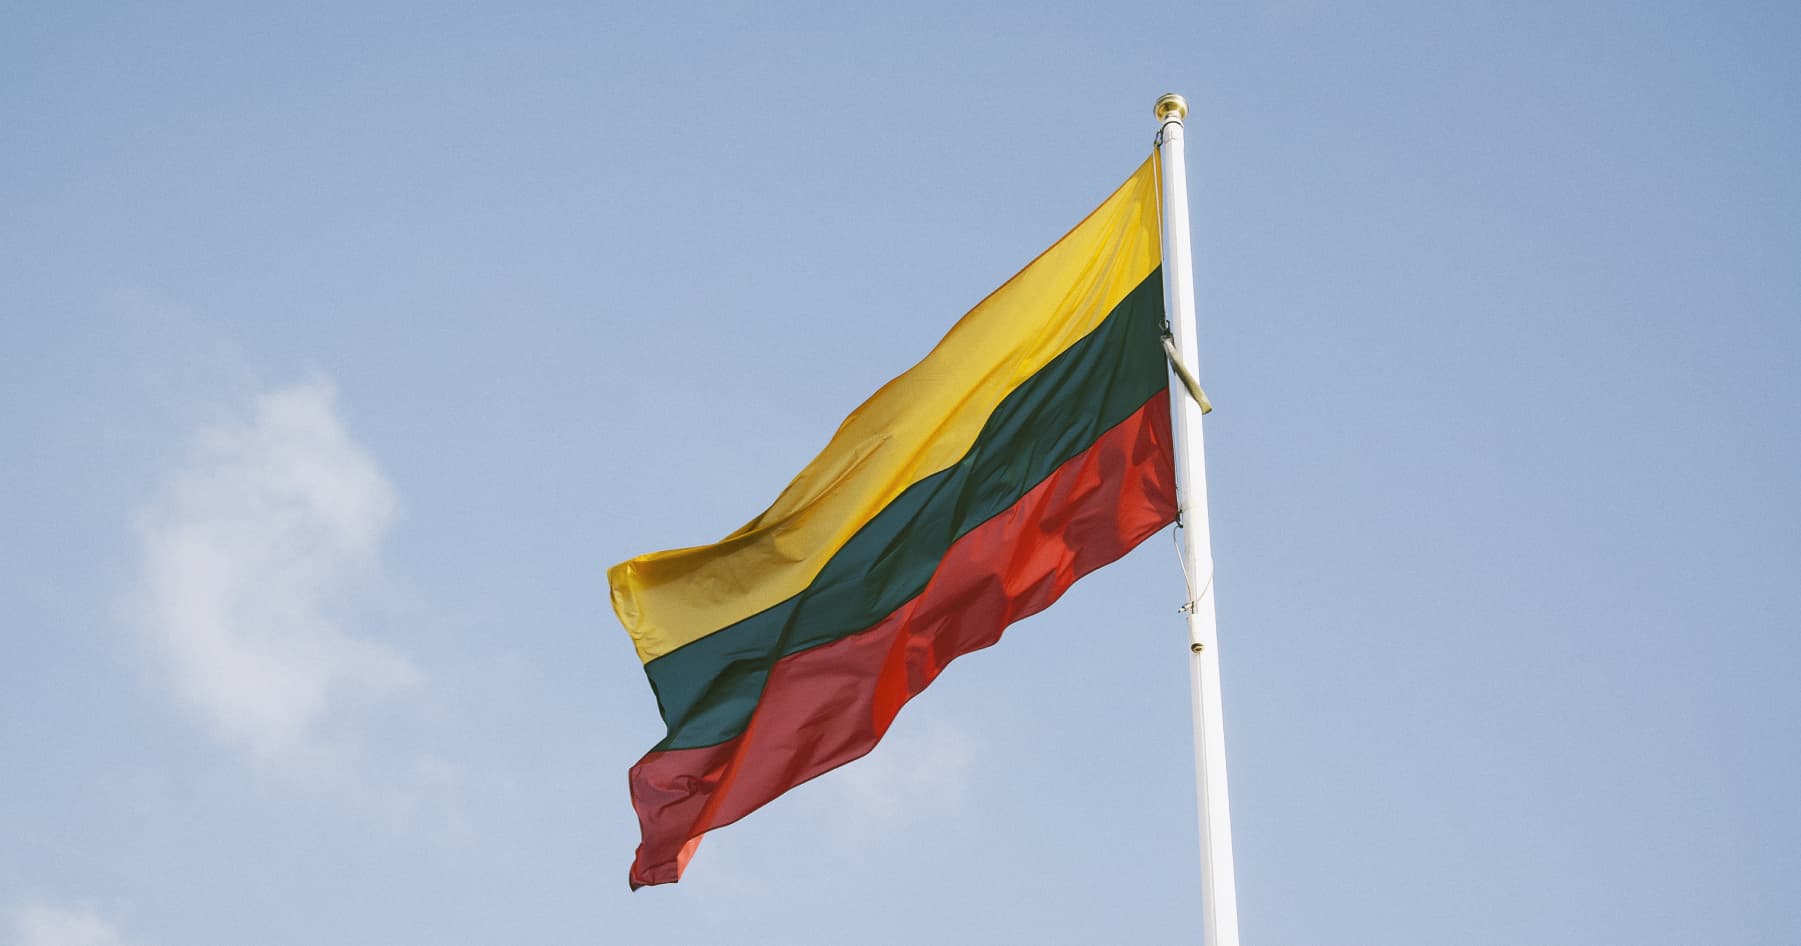 Lithuania will not grant asylum to Russians fleeing from responsibility